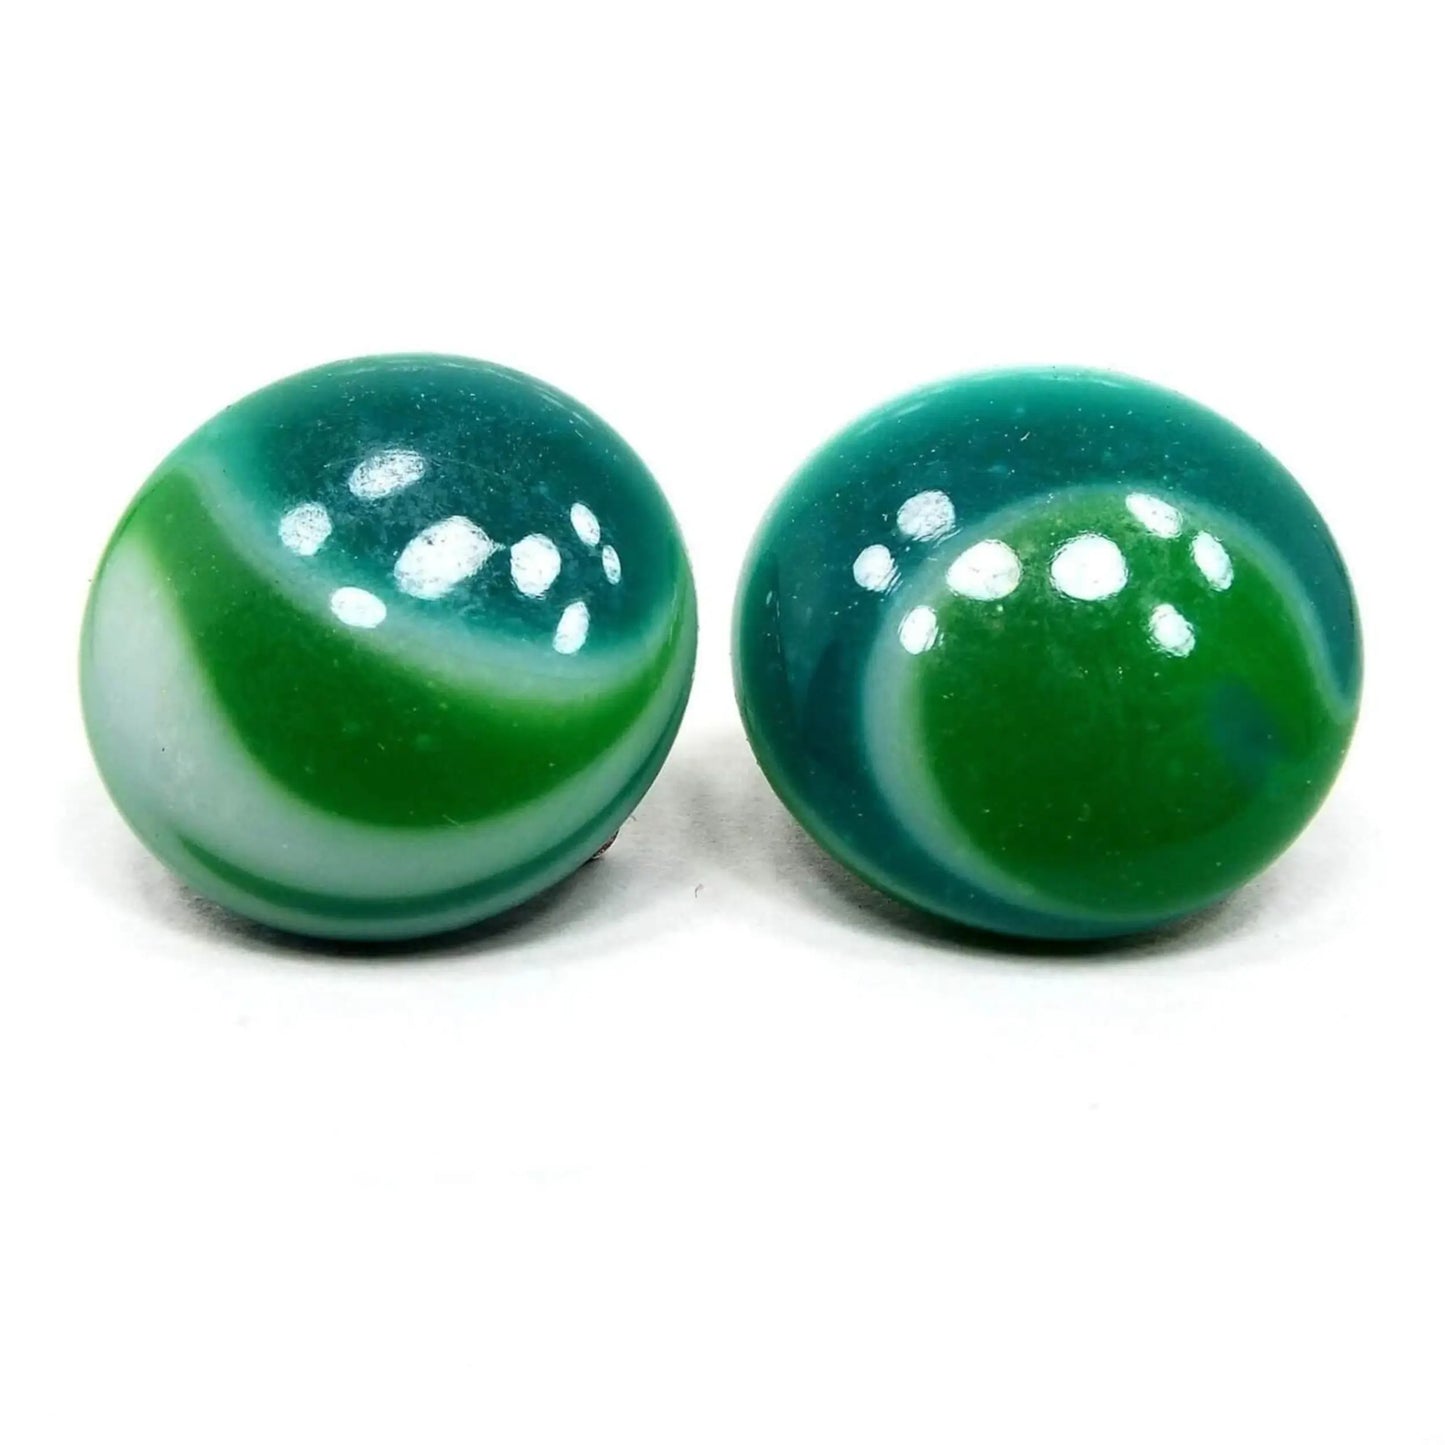 Front view of the Japanese Mid Century vintage clip on earrings. They are domed round in shape. One has curved striped areas of green, teal green, and white and the other has curved round areas of the same colors for an asymmetrical style design.